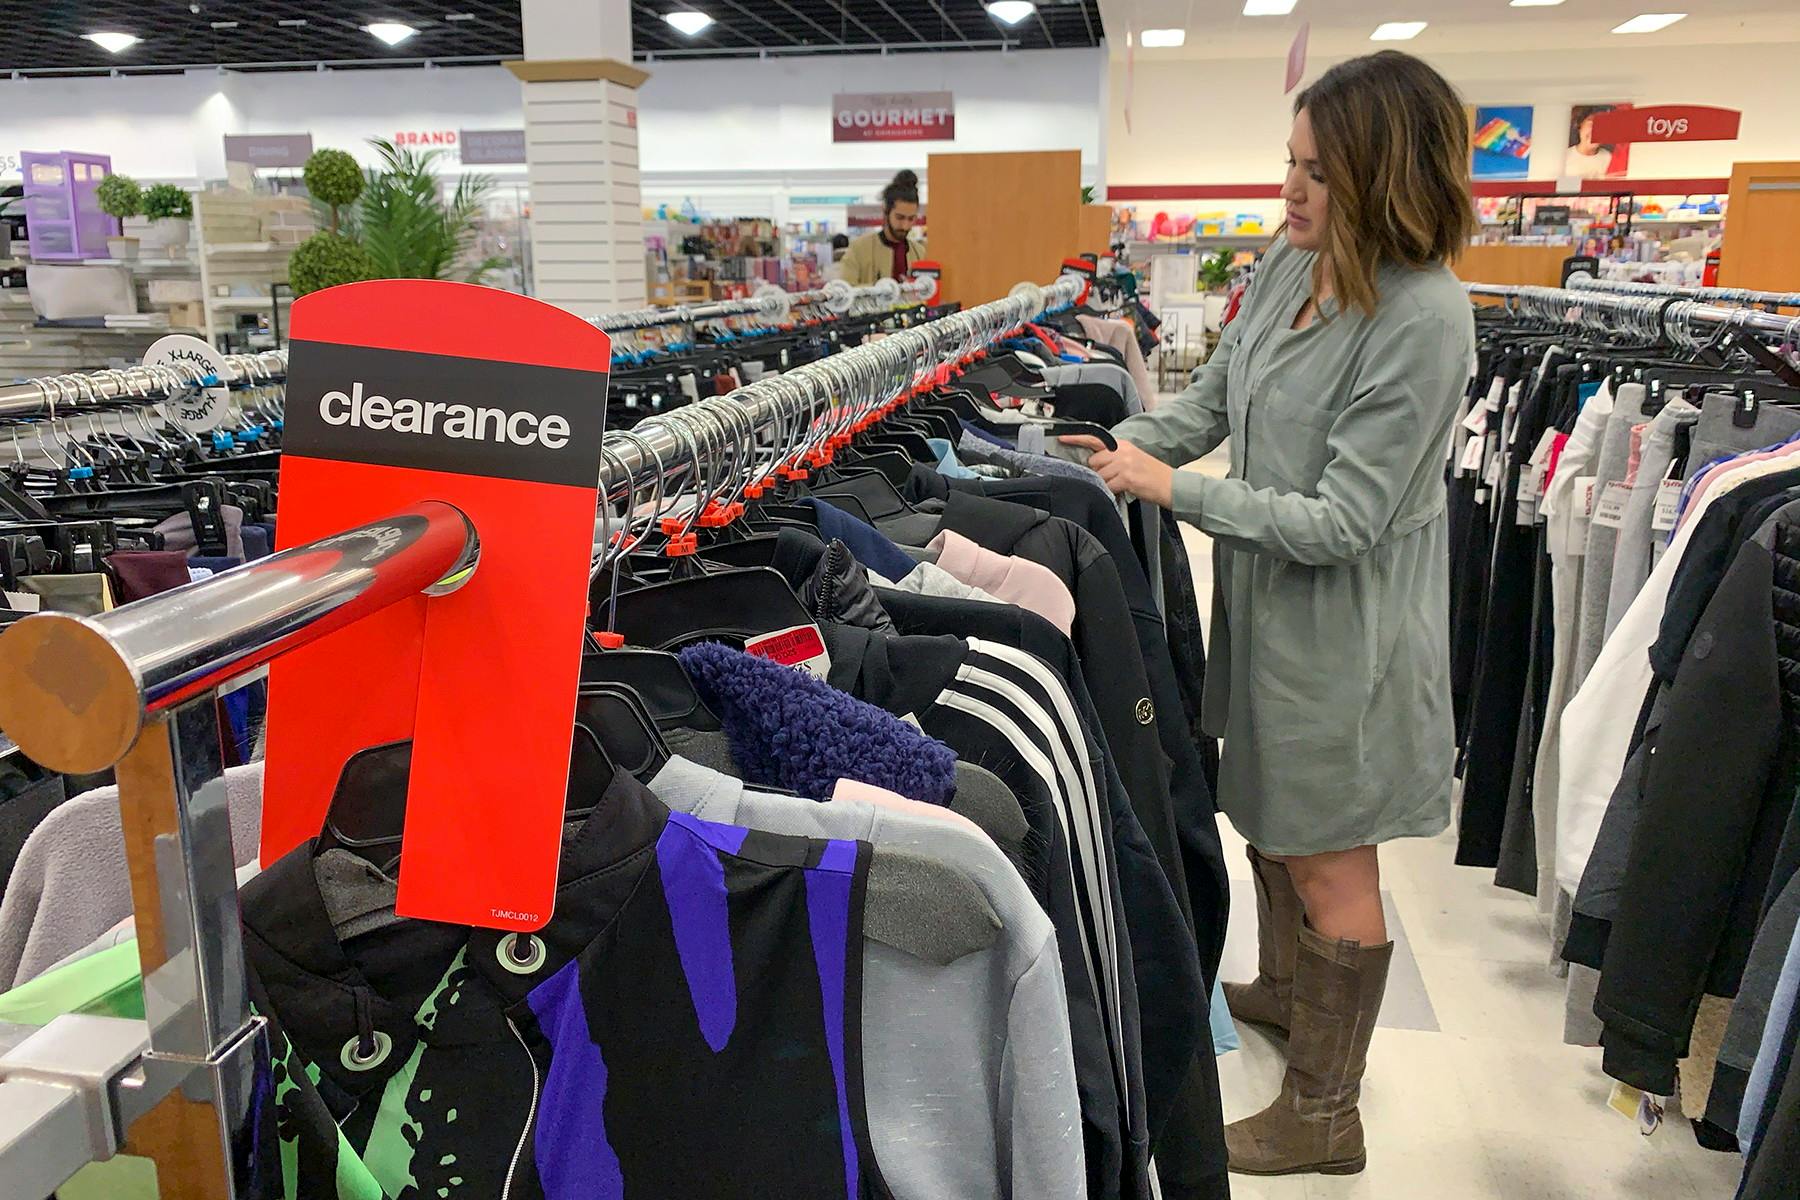 A woman looking through the clearance clothing rack.